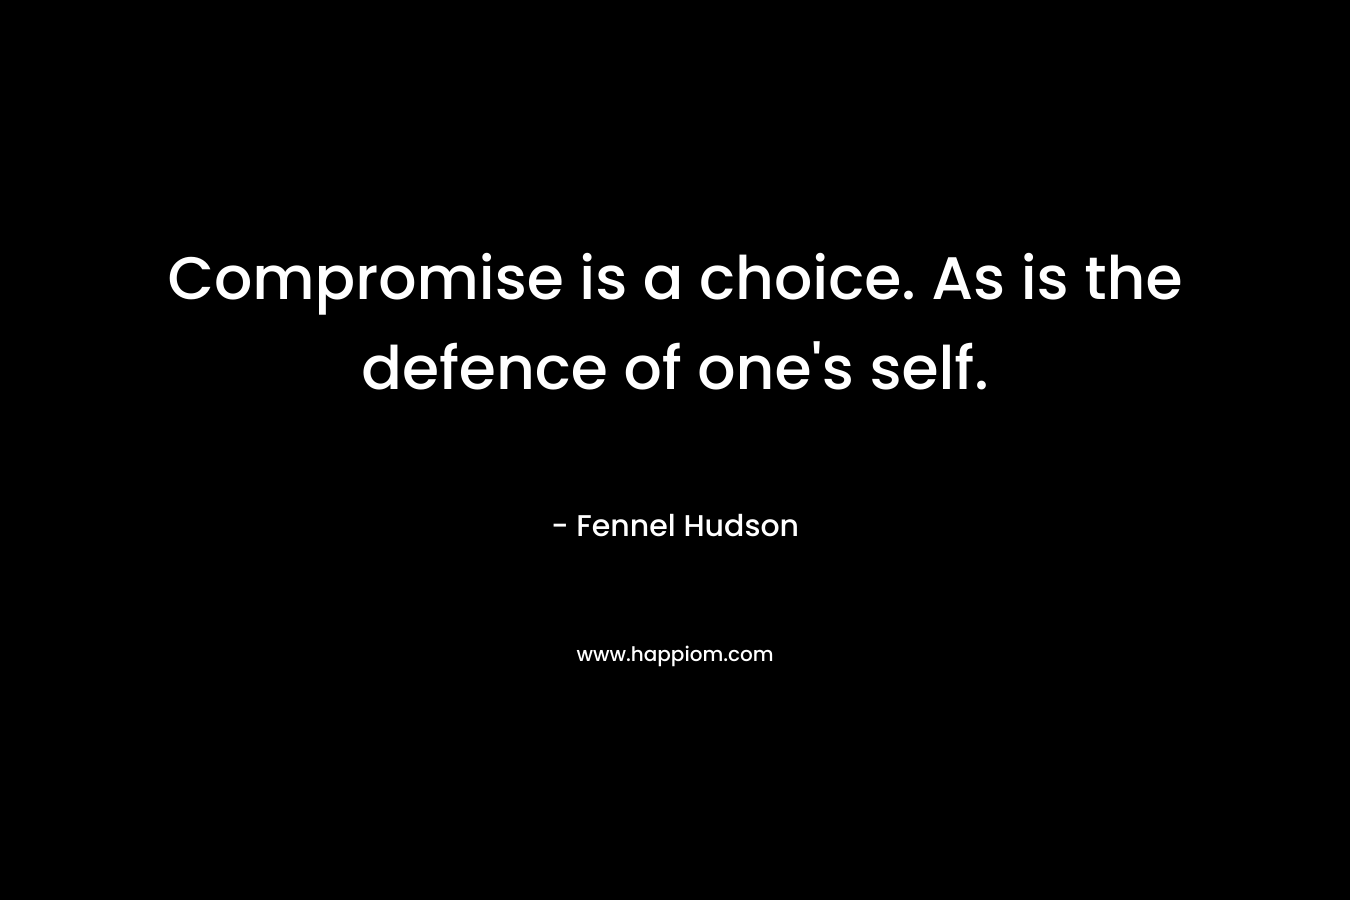 Compromise is a choice. As is the defence of one's self.